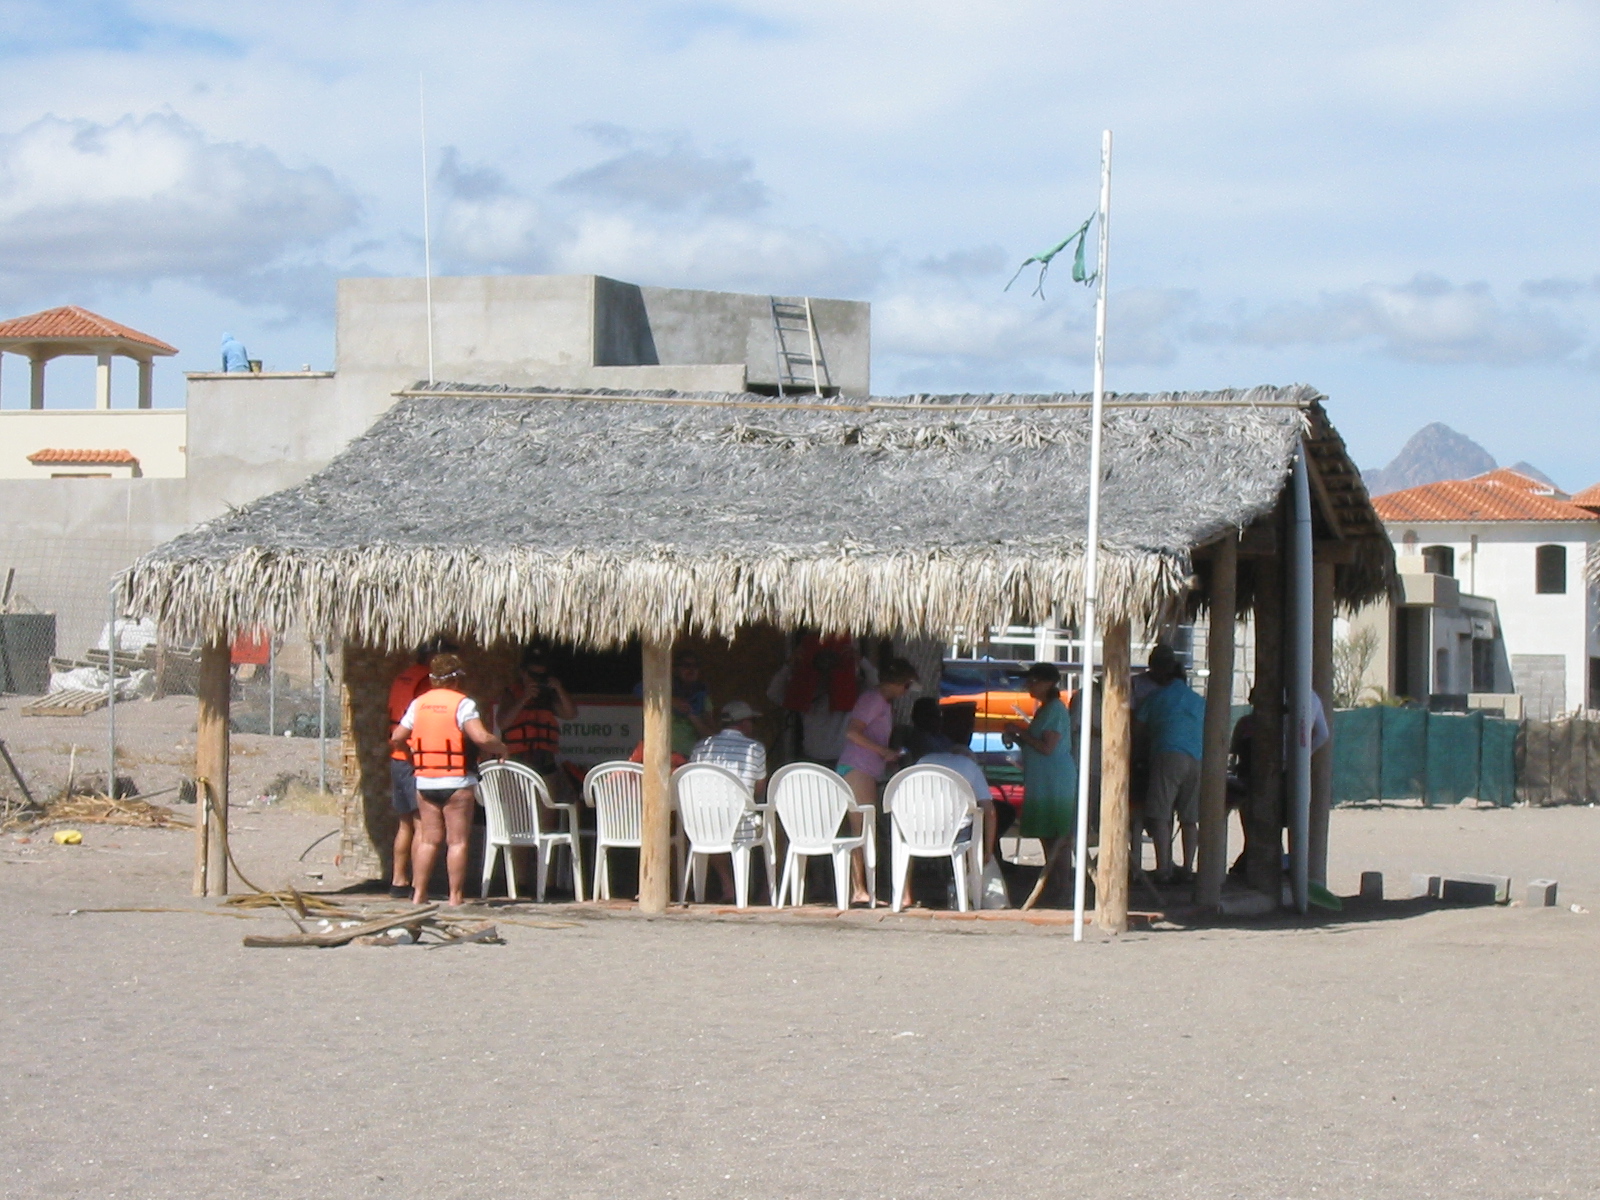 The local office of Arturo's Sport Fishing. This picture shows passengers from a visiting cruise ship assembling for a tour.